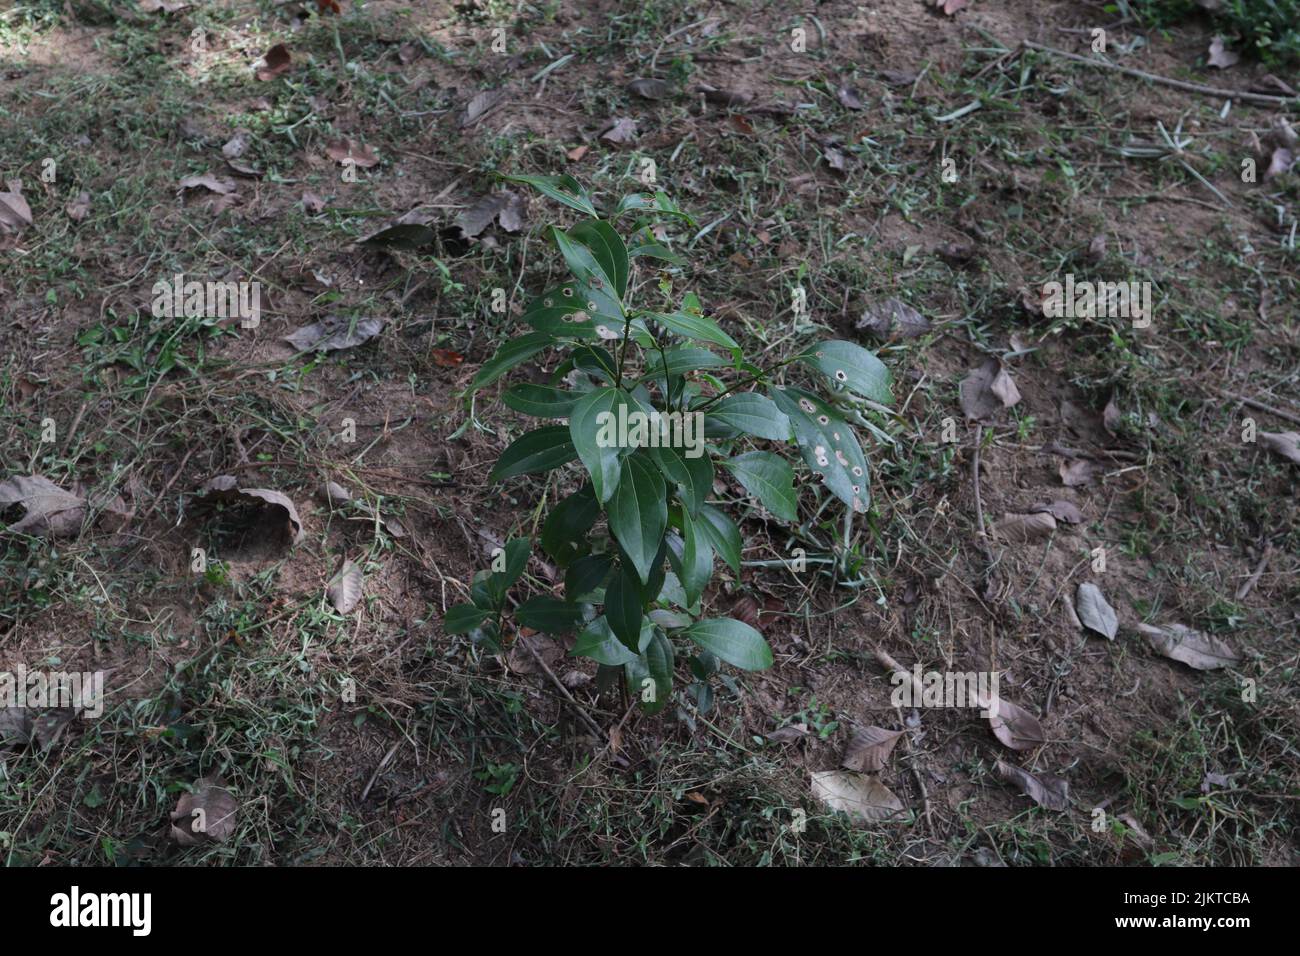 A planted young Cinnamon plant grows in a cinnamon plantation, in background weed plants removed and put on the ground to become dry and decompose Stock Photo